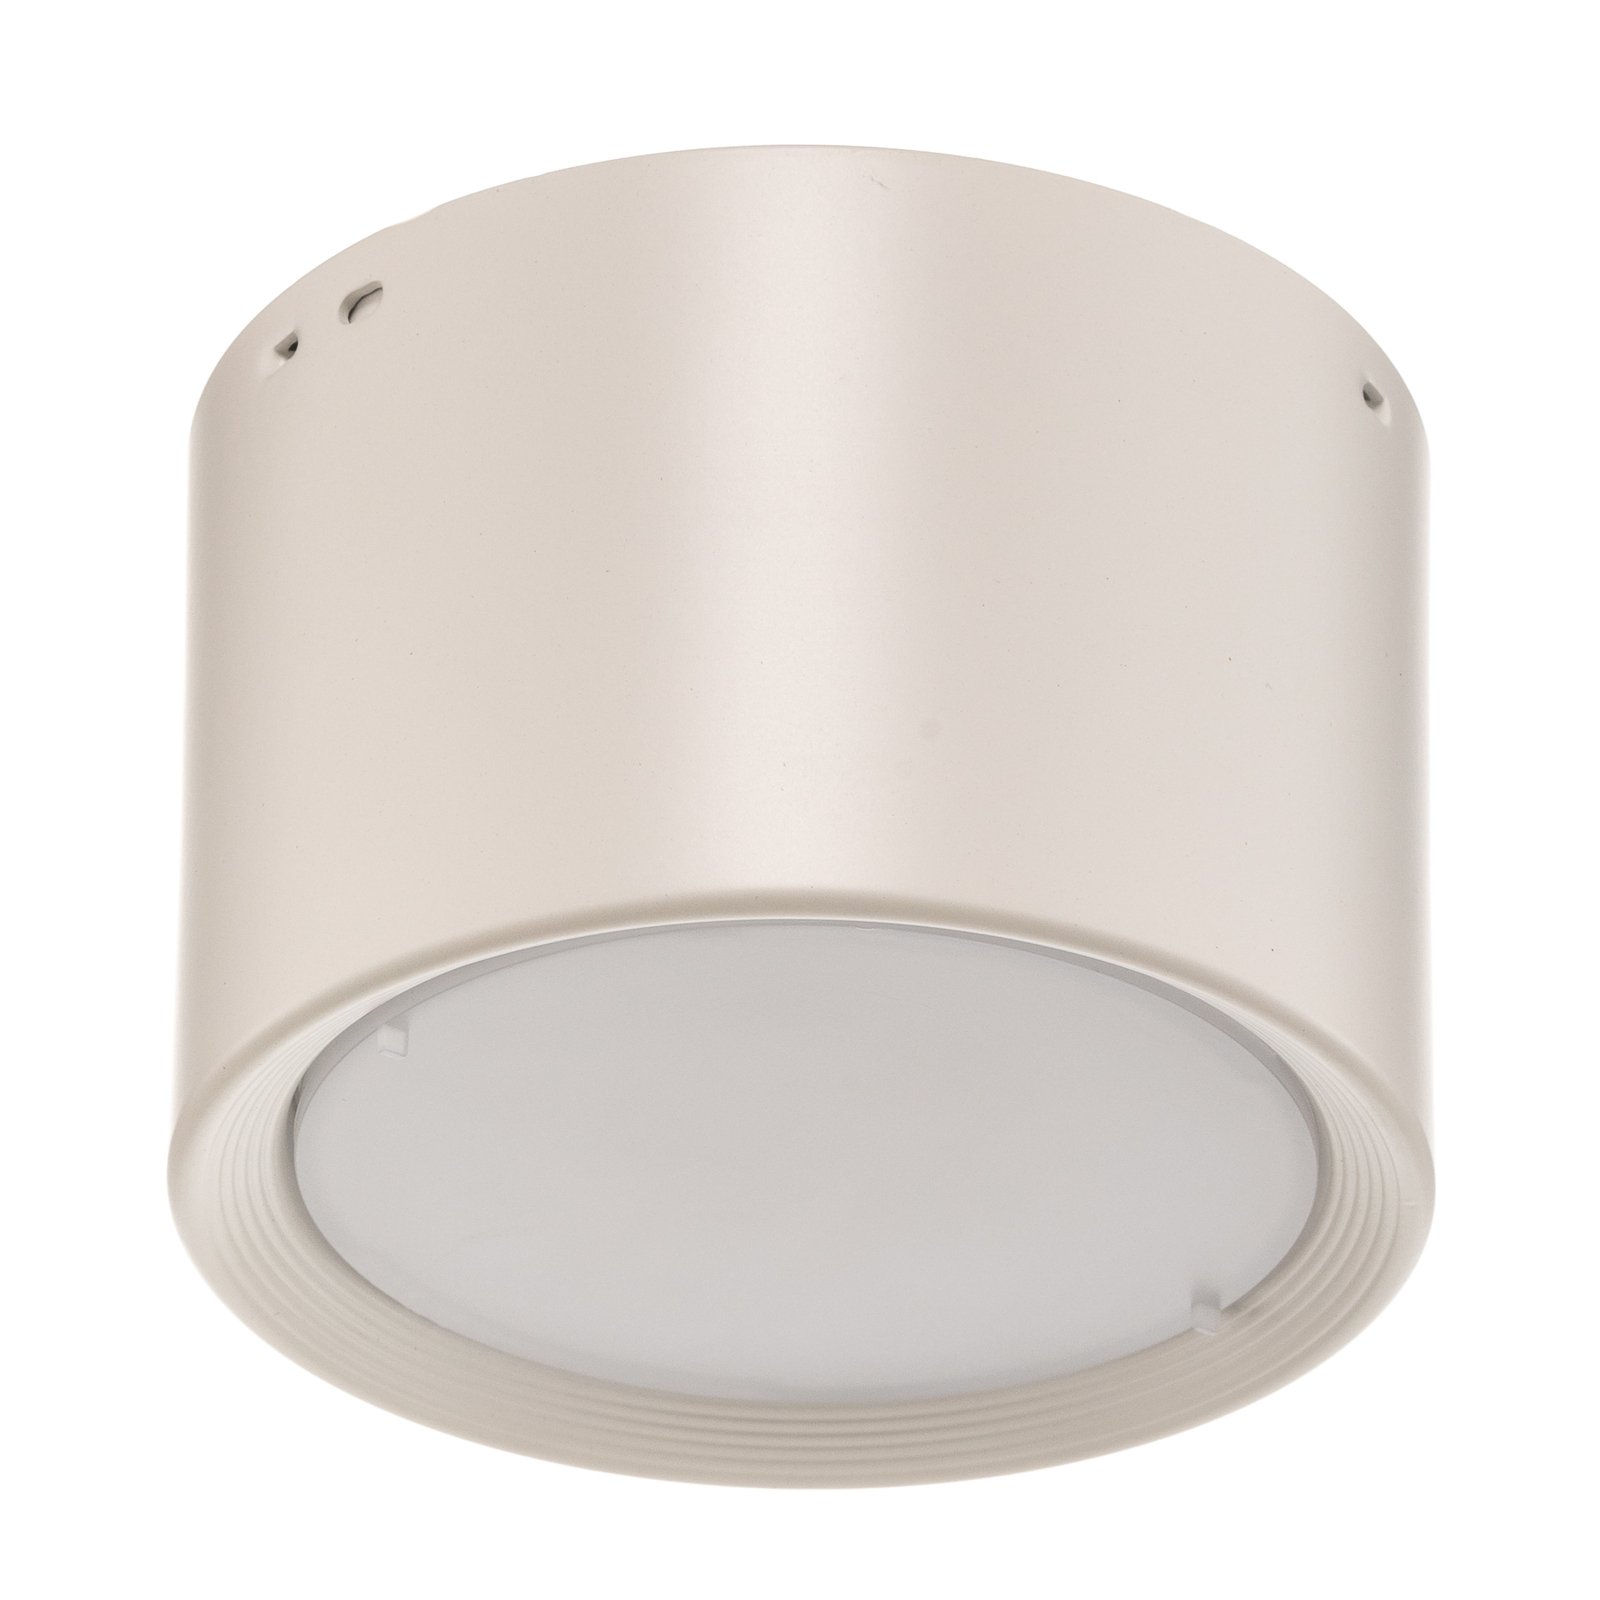 LED downlight Ita in white with diffuser, Ø 12 cm